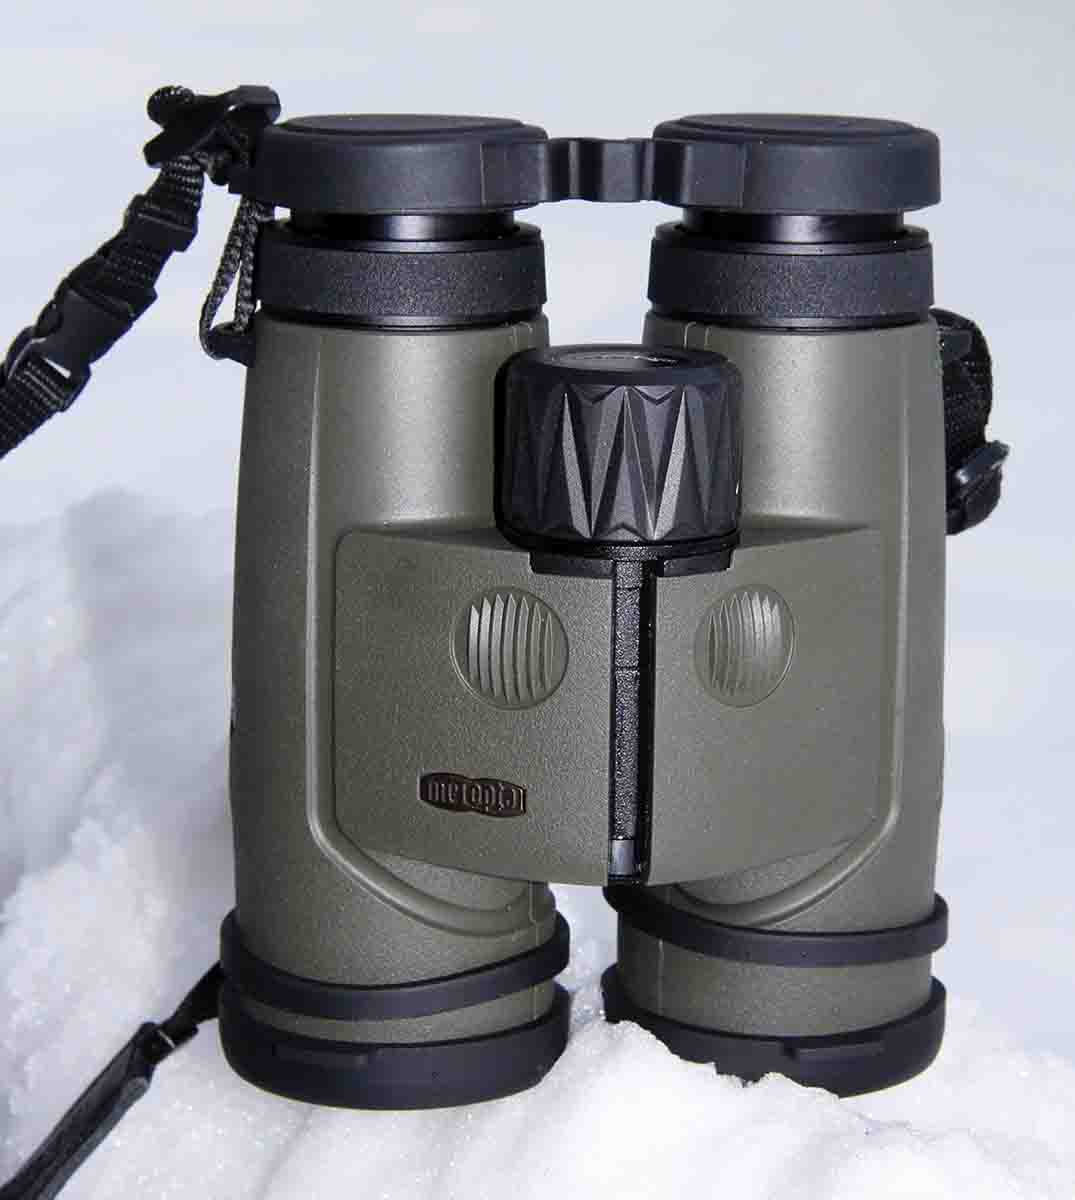 Meopta’s MeoPro LR 10x42 HD Rangefinding Binocular comes with protective ocular and objective lens covers.